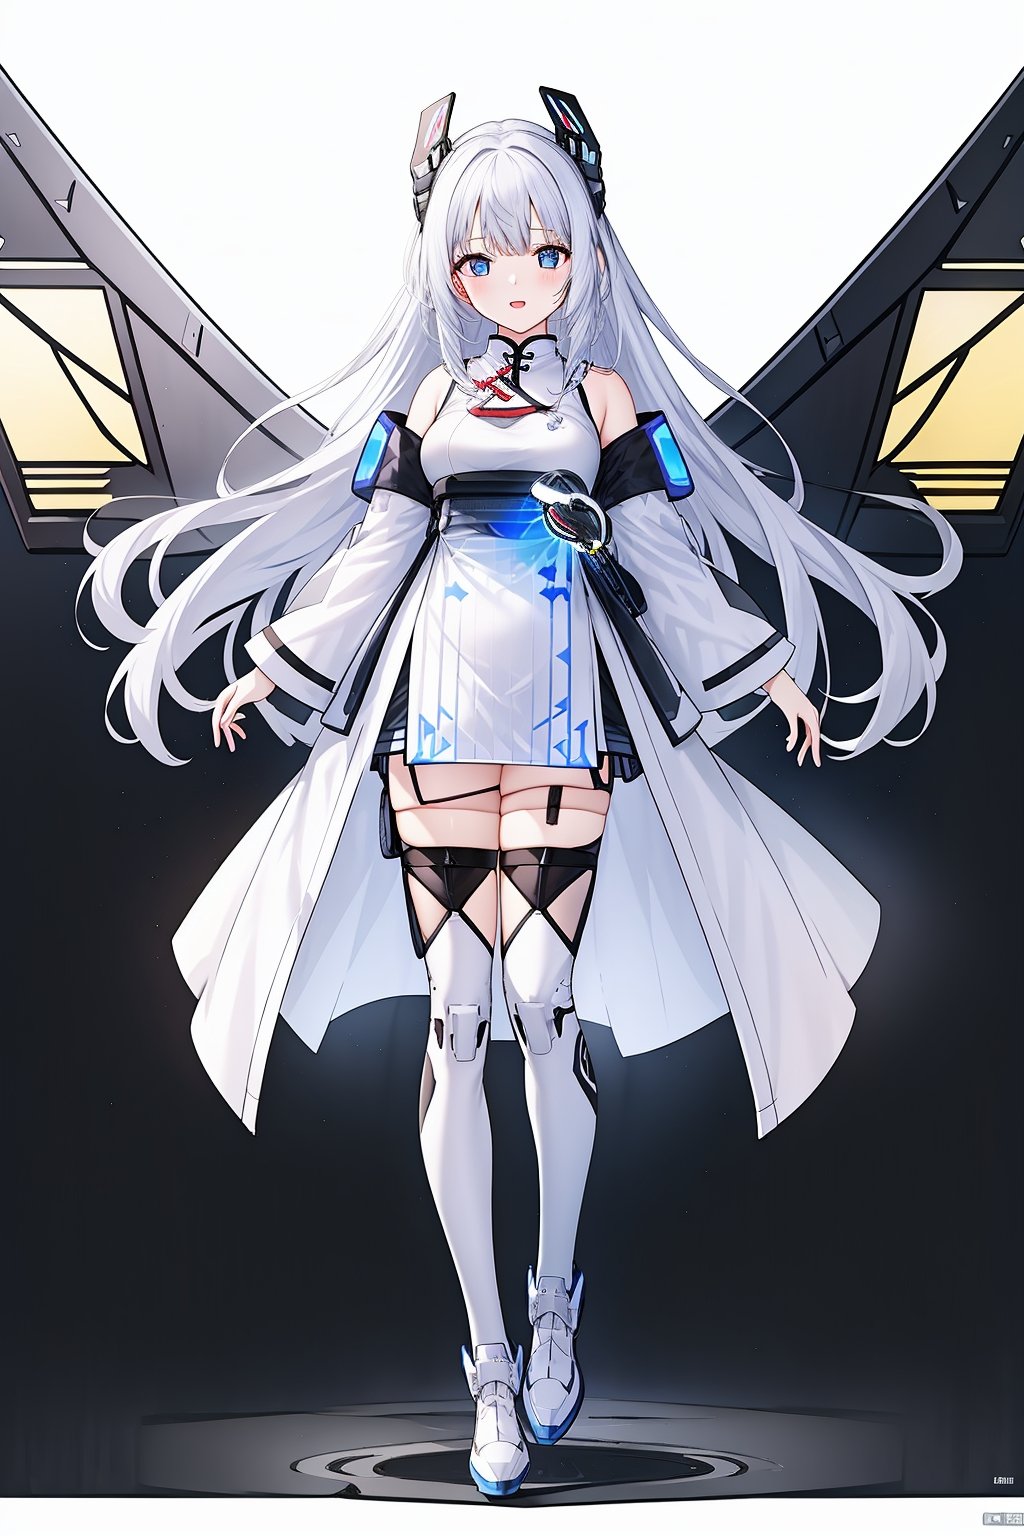 1 girl, solo, blue and white gradual color Mecha pants, wings, blue eyes, long hair, purple shoes, hair accessories, looking at the audience, white hair, hair accessories, bangs, blue eyes, staff, clean background, mechanical wings, (graphics card fan: 1.5), gloves, simple background, cute, graphics card propaganda figures, console, keyboard, mouse, handle, red and white gradient color cheongsam, festive, color theme, ancient Chinese architecture, cheongsam,<lora:天启姬:0.7>,